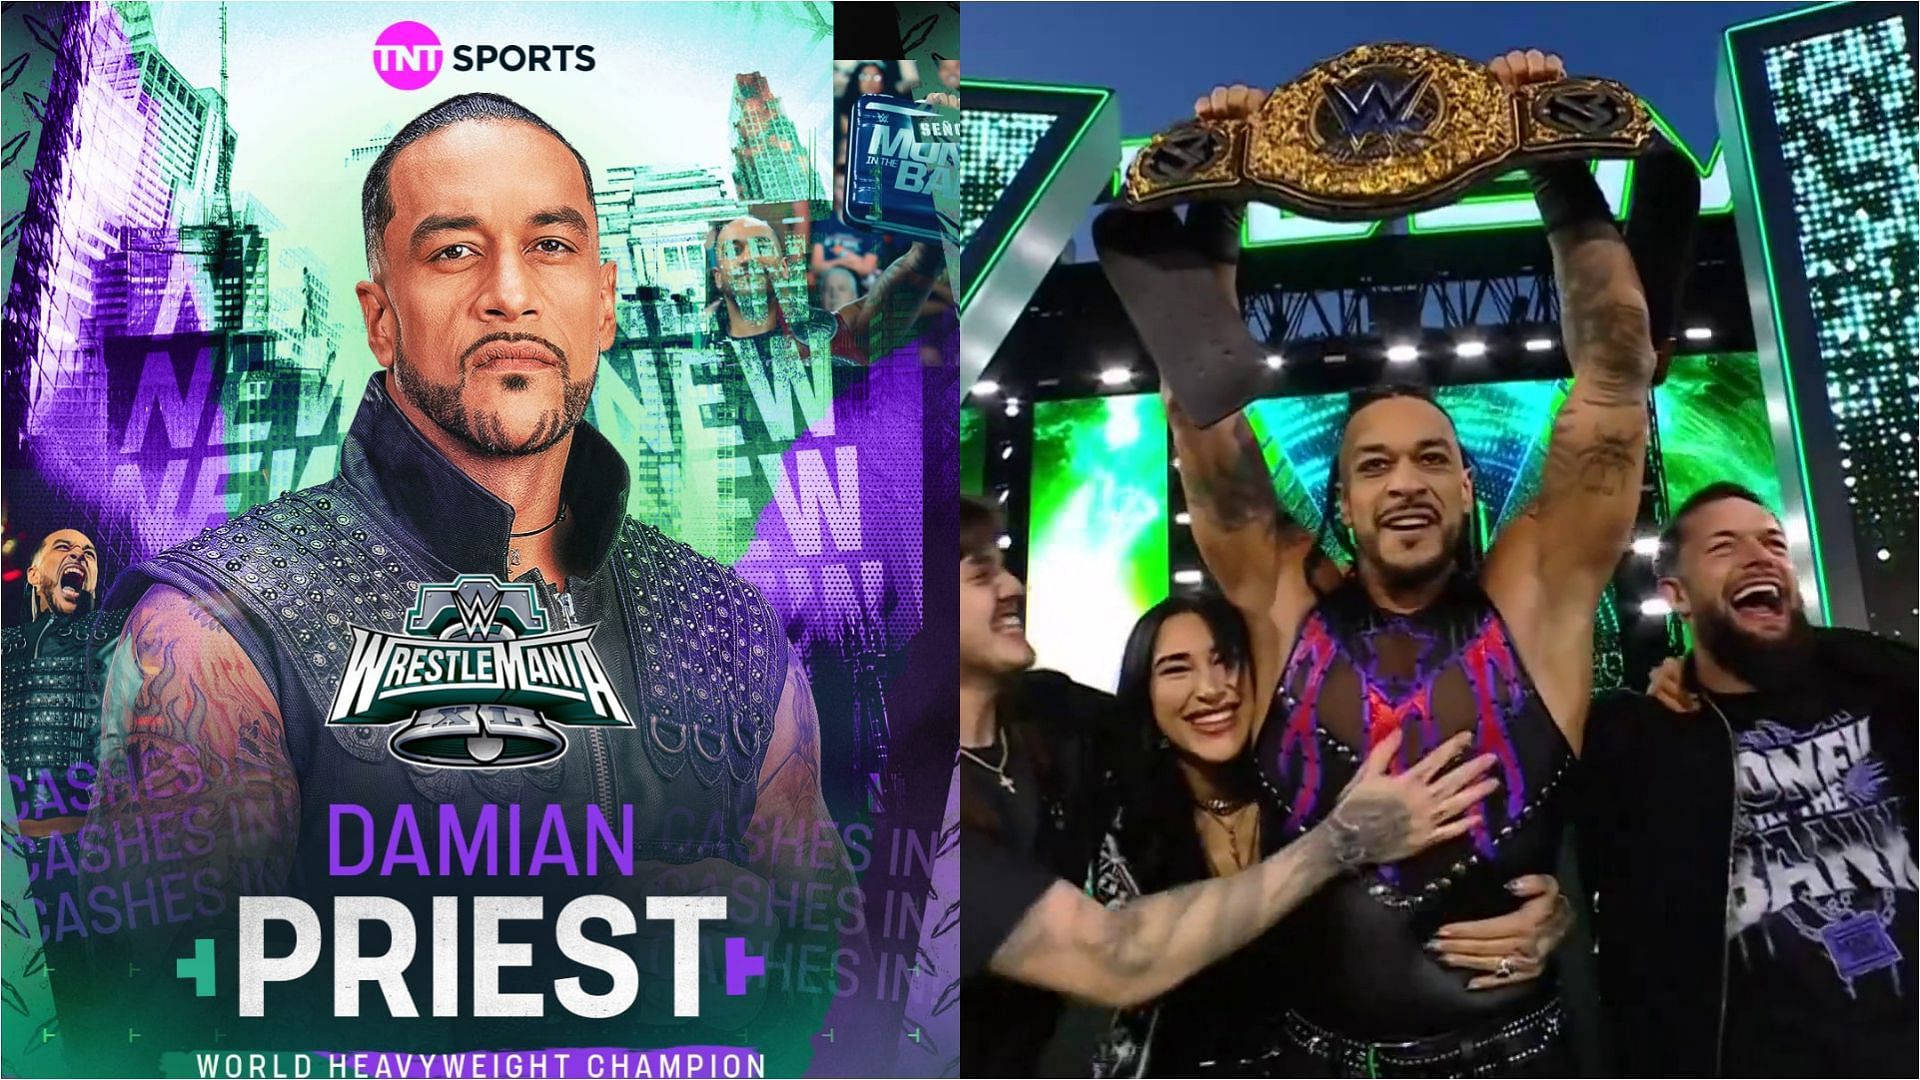 Damian Priest shocked the world by dethroning Drew McIntyre at WWE WrestleMania XL [Images courtesy of WWE